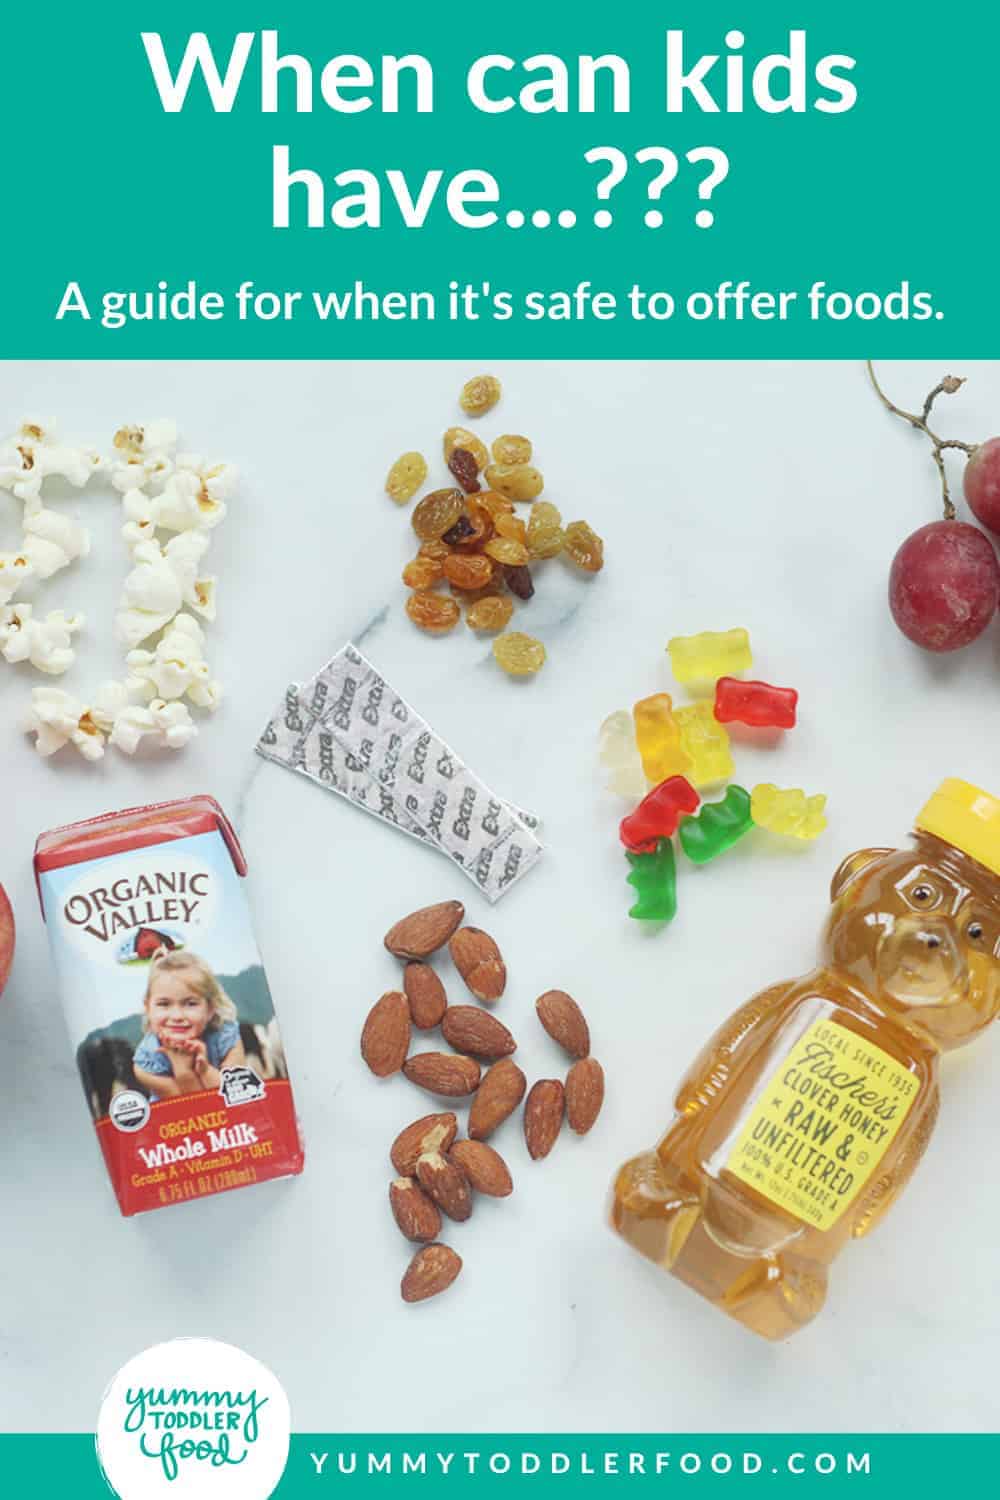 When Can Kids Eat.? (A Guide for Feeding Kids Common Foods Safely)